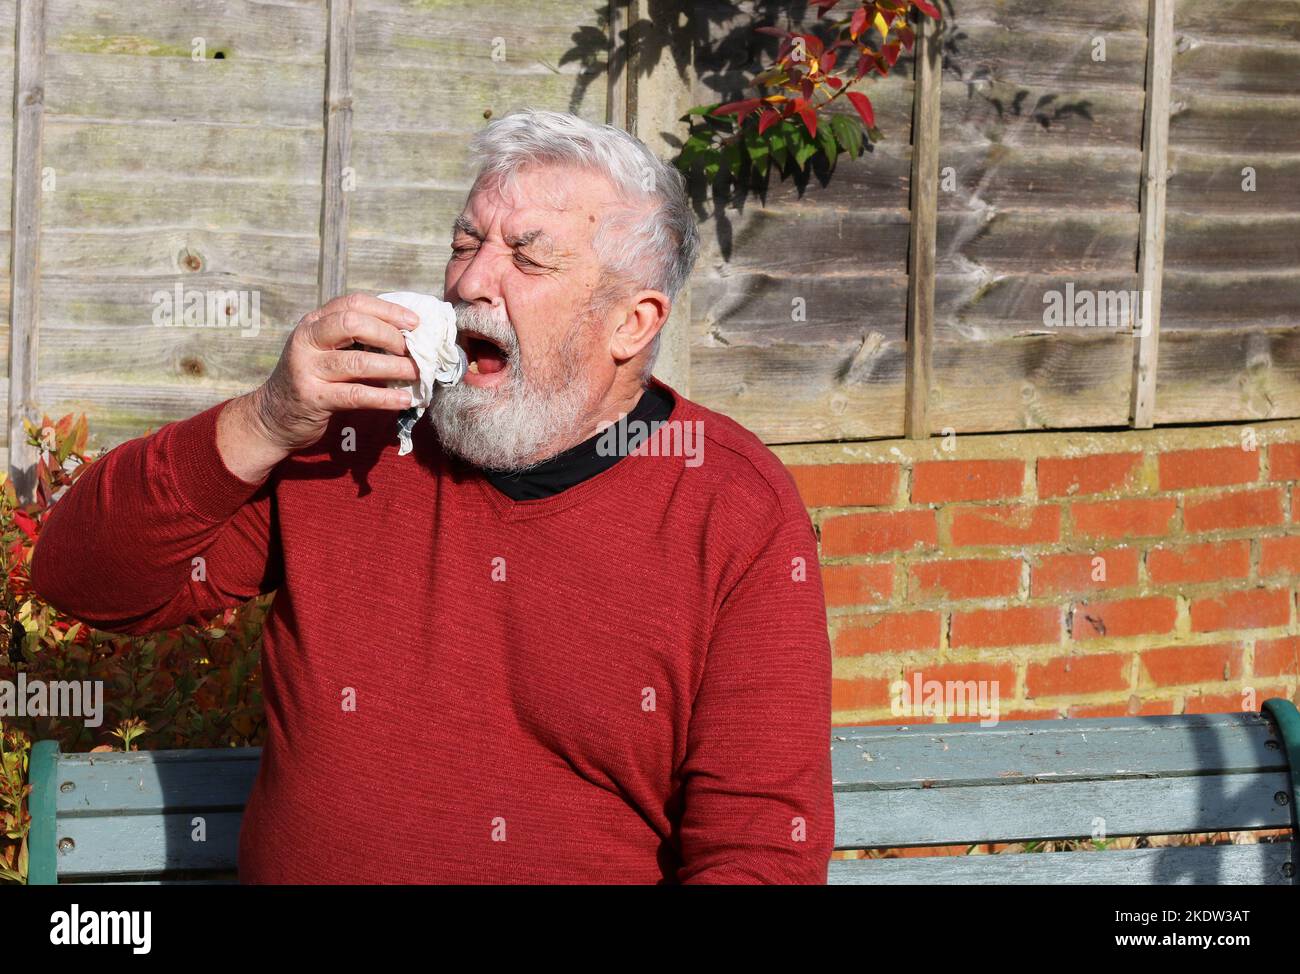 Senior or elderly man sneezing holding a tissue. Cold, influenza or hay fever. Stock Photo